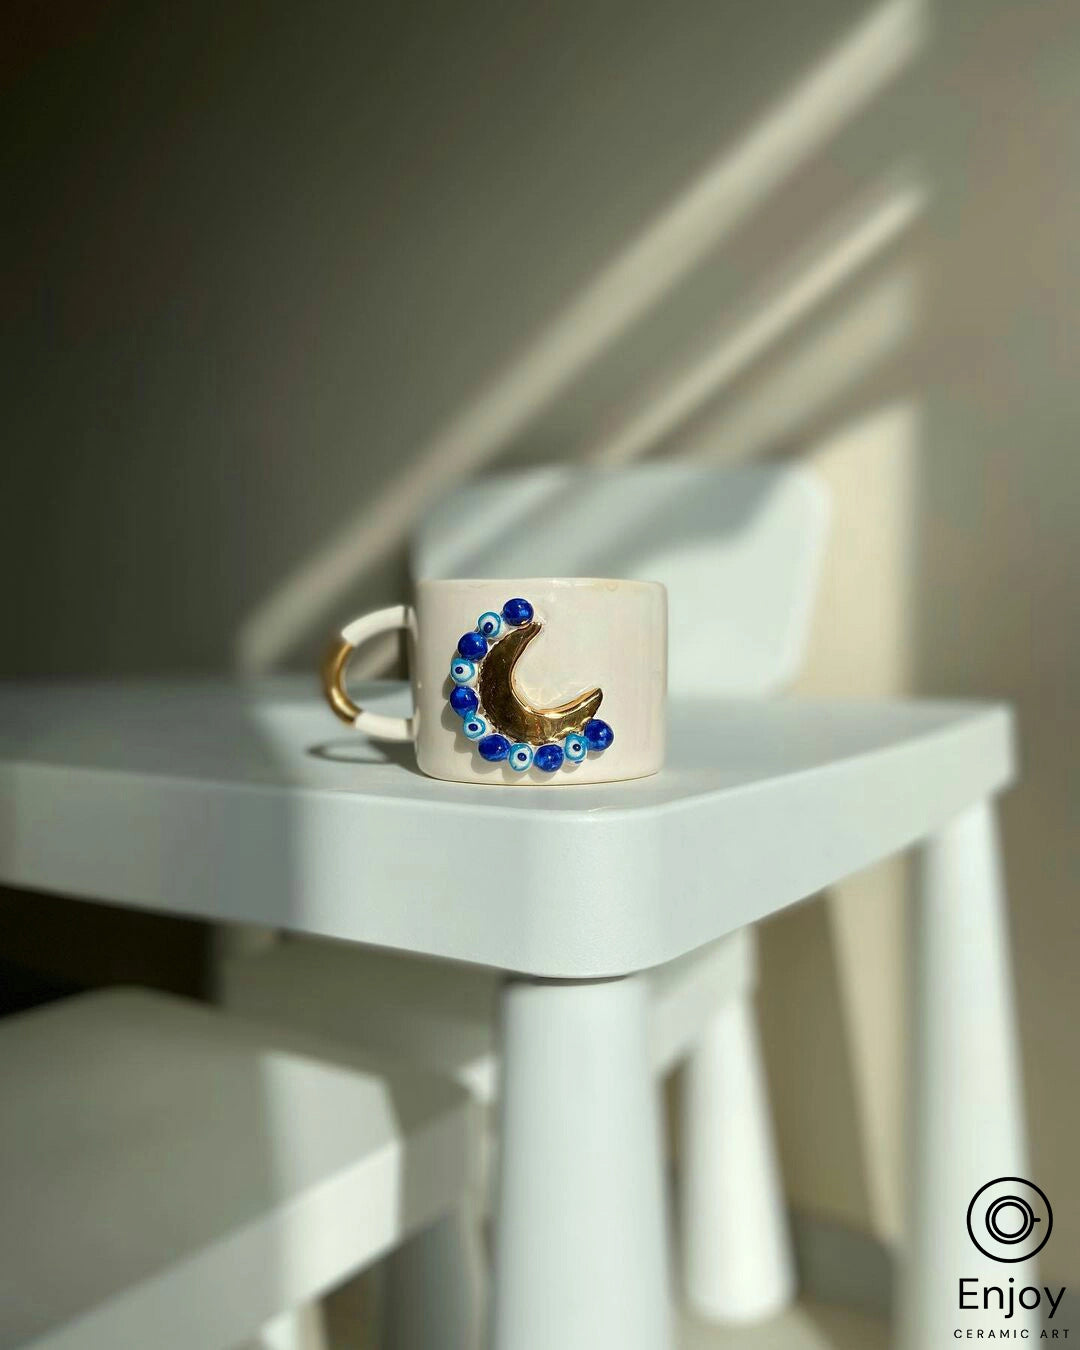 An artistic 'Blue Moon' ceramic mug with a golden crescent and blue evil eye beads on a modern white chair, bathed in soft sunlight casting geometric shadows.